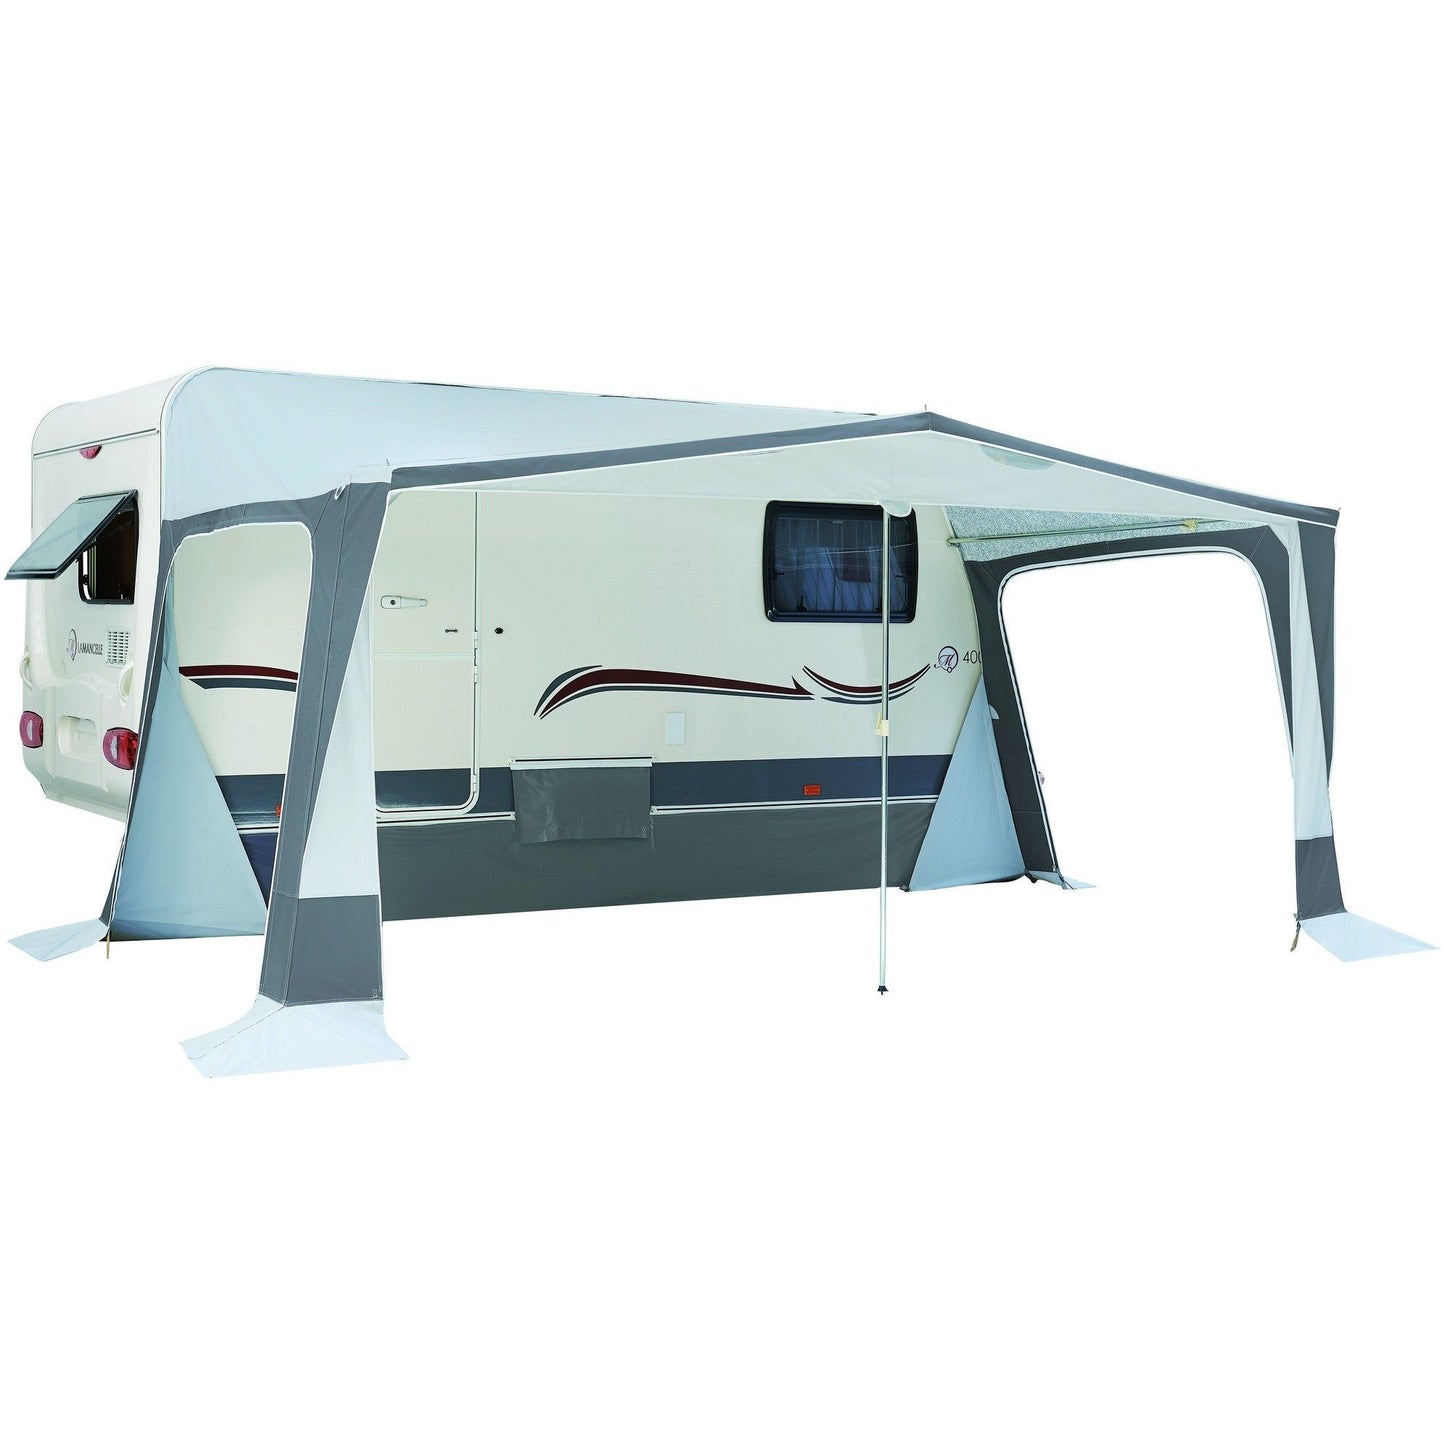 Exterior view of Trigano Adriatic Full Caravan Awning opened up